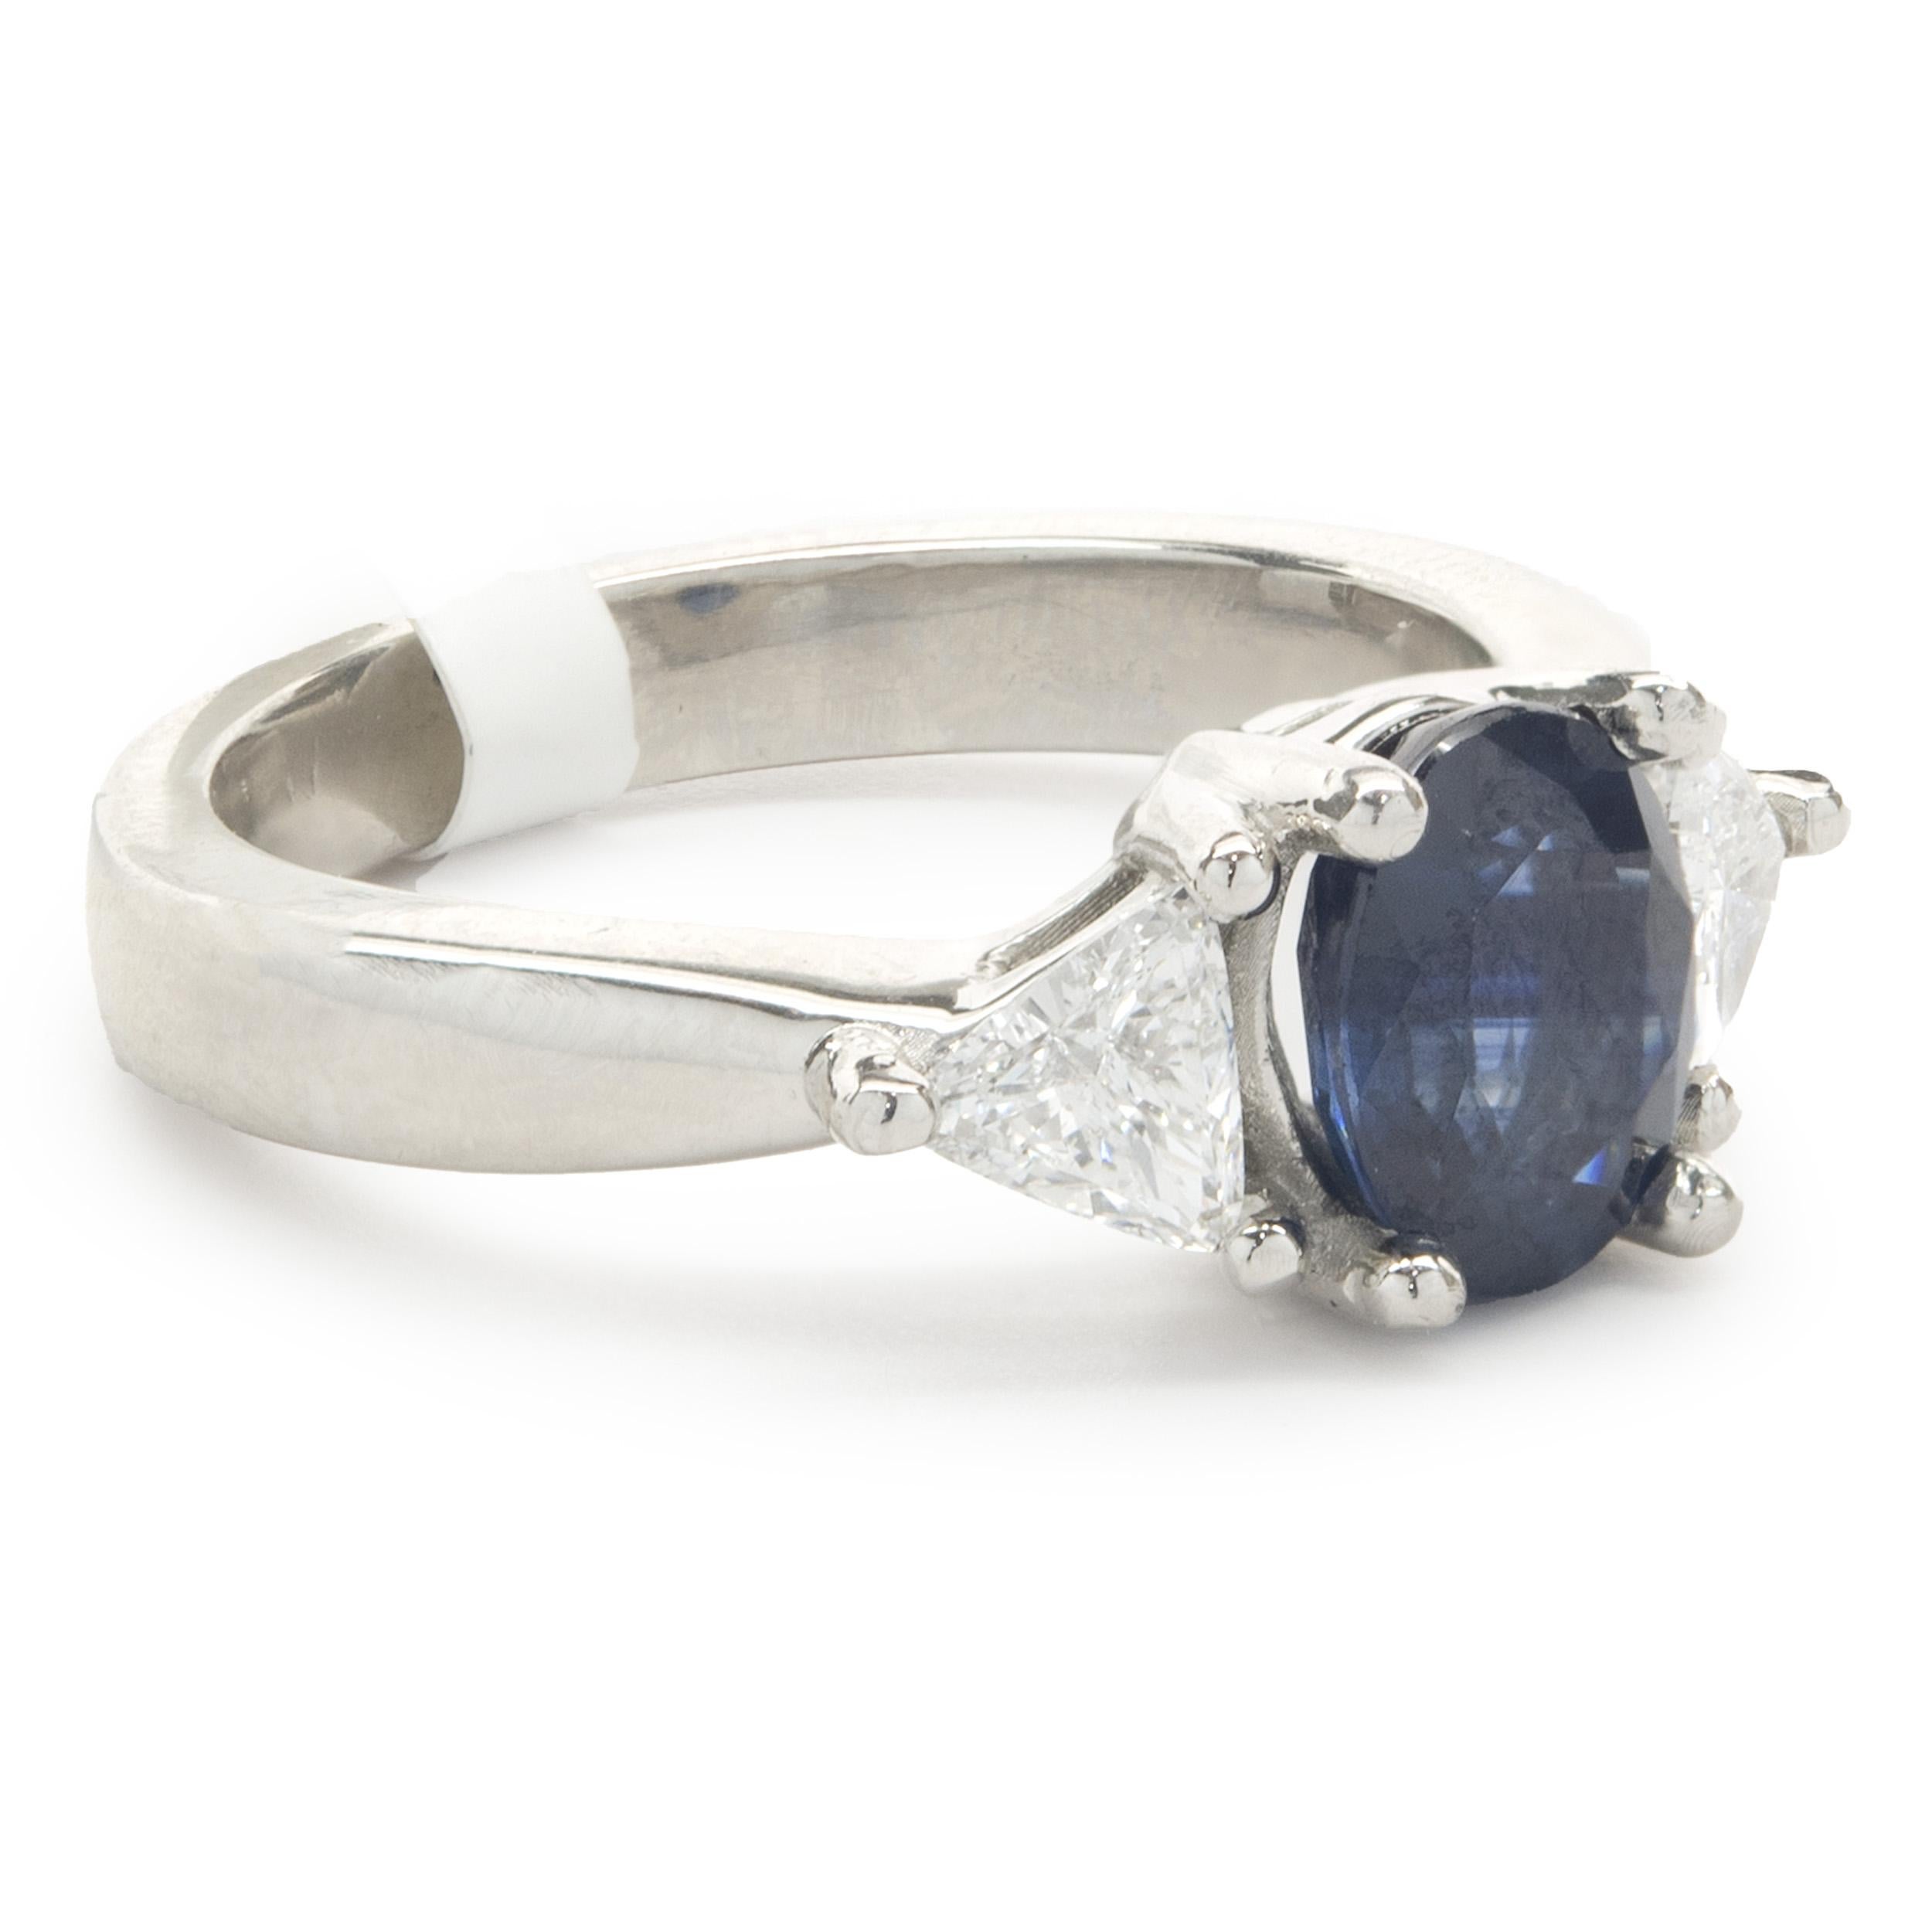 Designer: custom
Material: 14K white gold
Diamond: 2 trillion cut = 0.81cttw
Color: G
Clarity: SI1
Sapphire: 1 oval cut =- 1.89ct
Dimensions: ring top measures 8mm wide
Ring Size: 6.5 (complimentary sizing available)
Weight: 9.02 grams